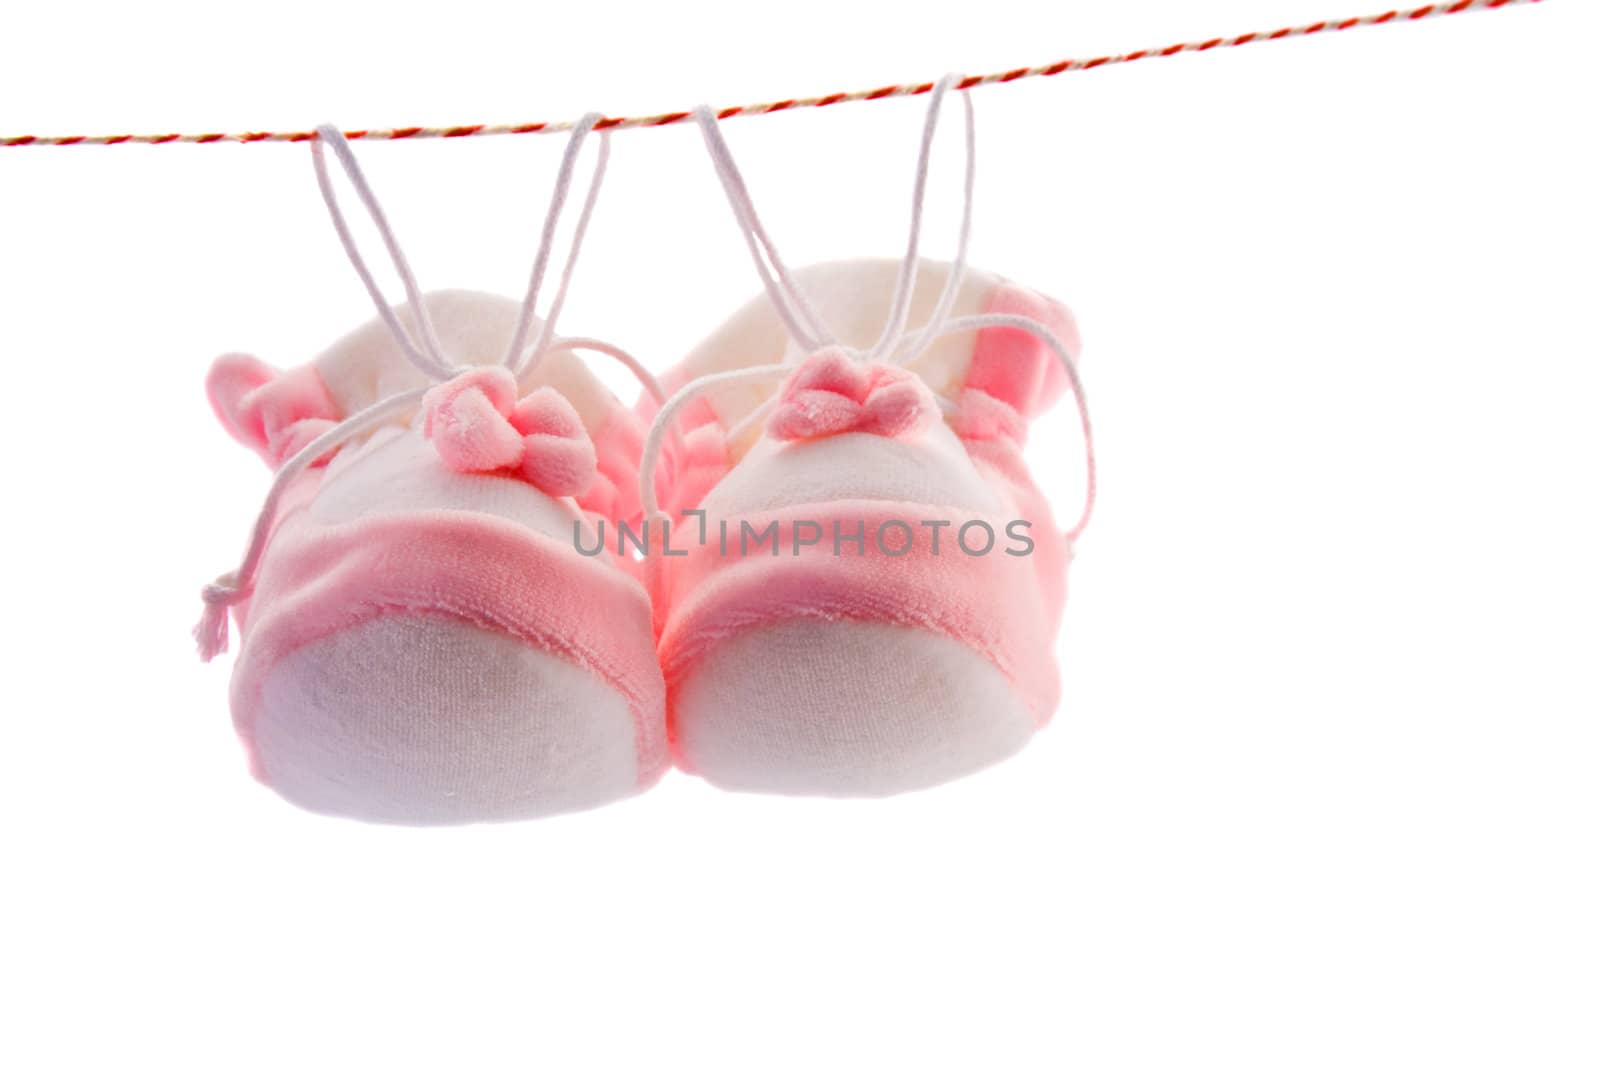 Pair of baby's slippers hanging on a rope. Including copy space.